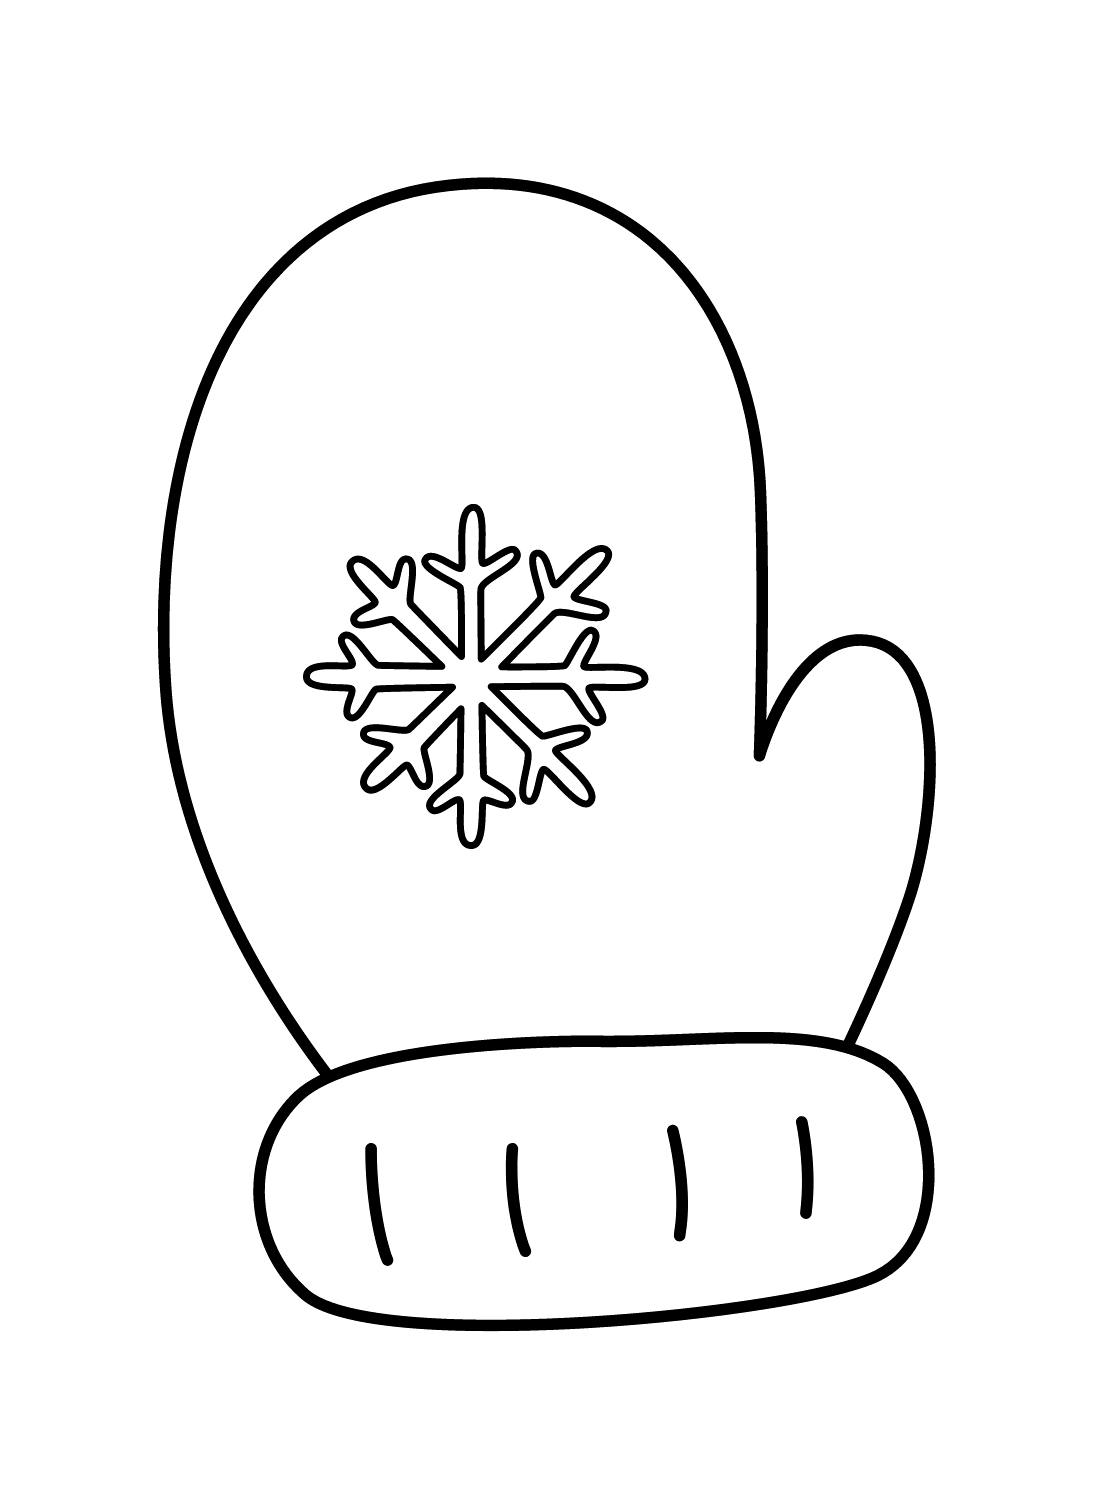 Printable Mittens for Kids Coloring Page